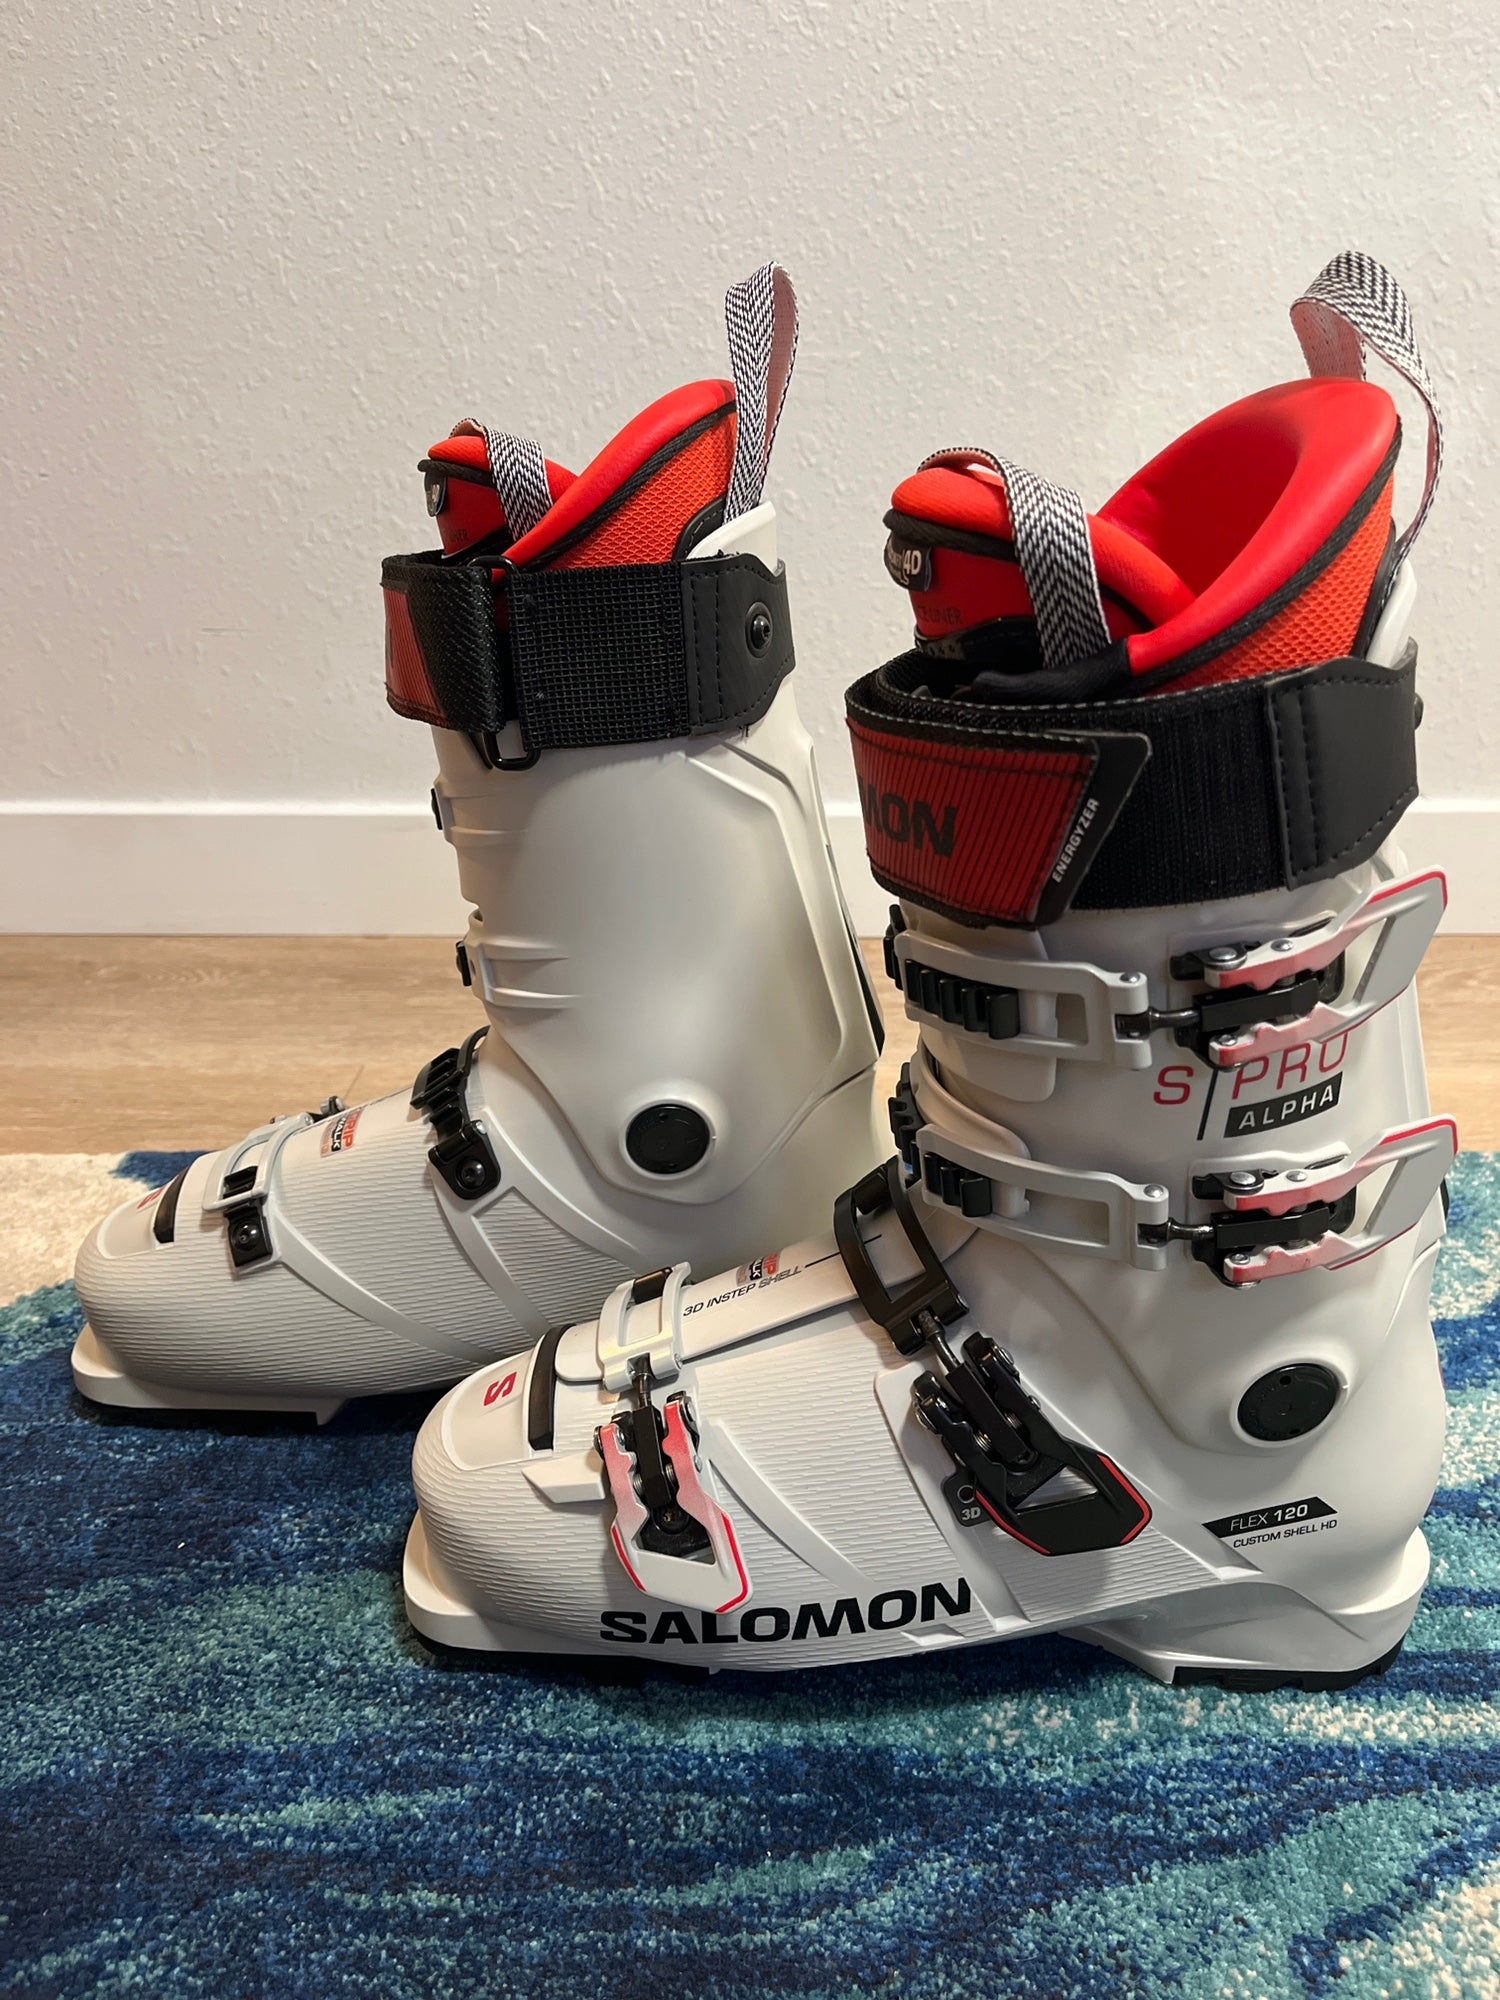 K2 Mindbender 120 LV ski boots Mondo 27.5! Purchased new, never worn. Got  caught up in the excitement of end of season sales, but realized…